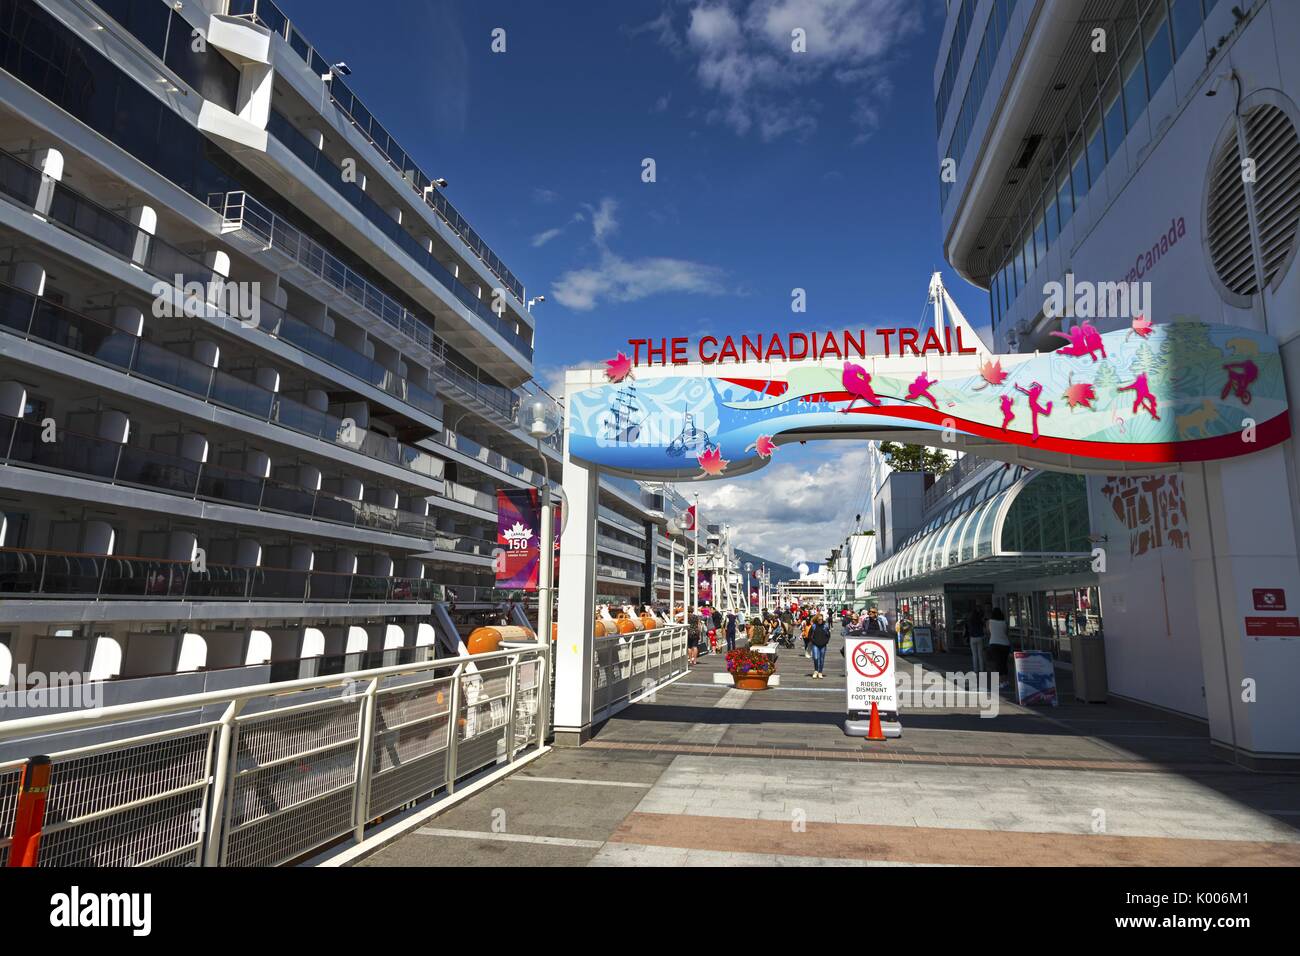 Tourist People walking on the Canadian Trail at Canada Place next to Big Cruise Ship docked in Port of Vancouver Harbor in British Columbia Canada Stock Photo